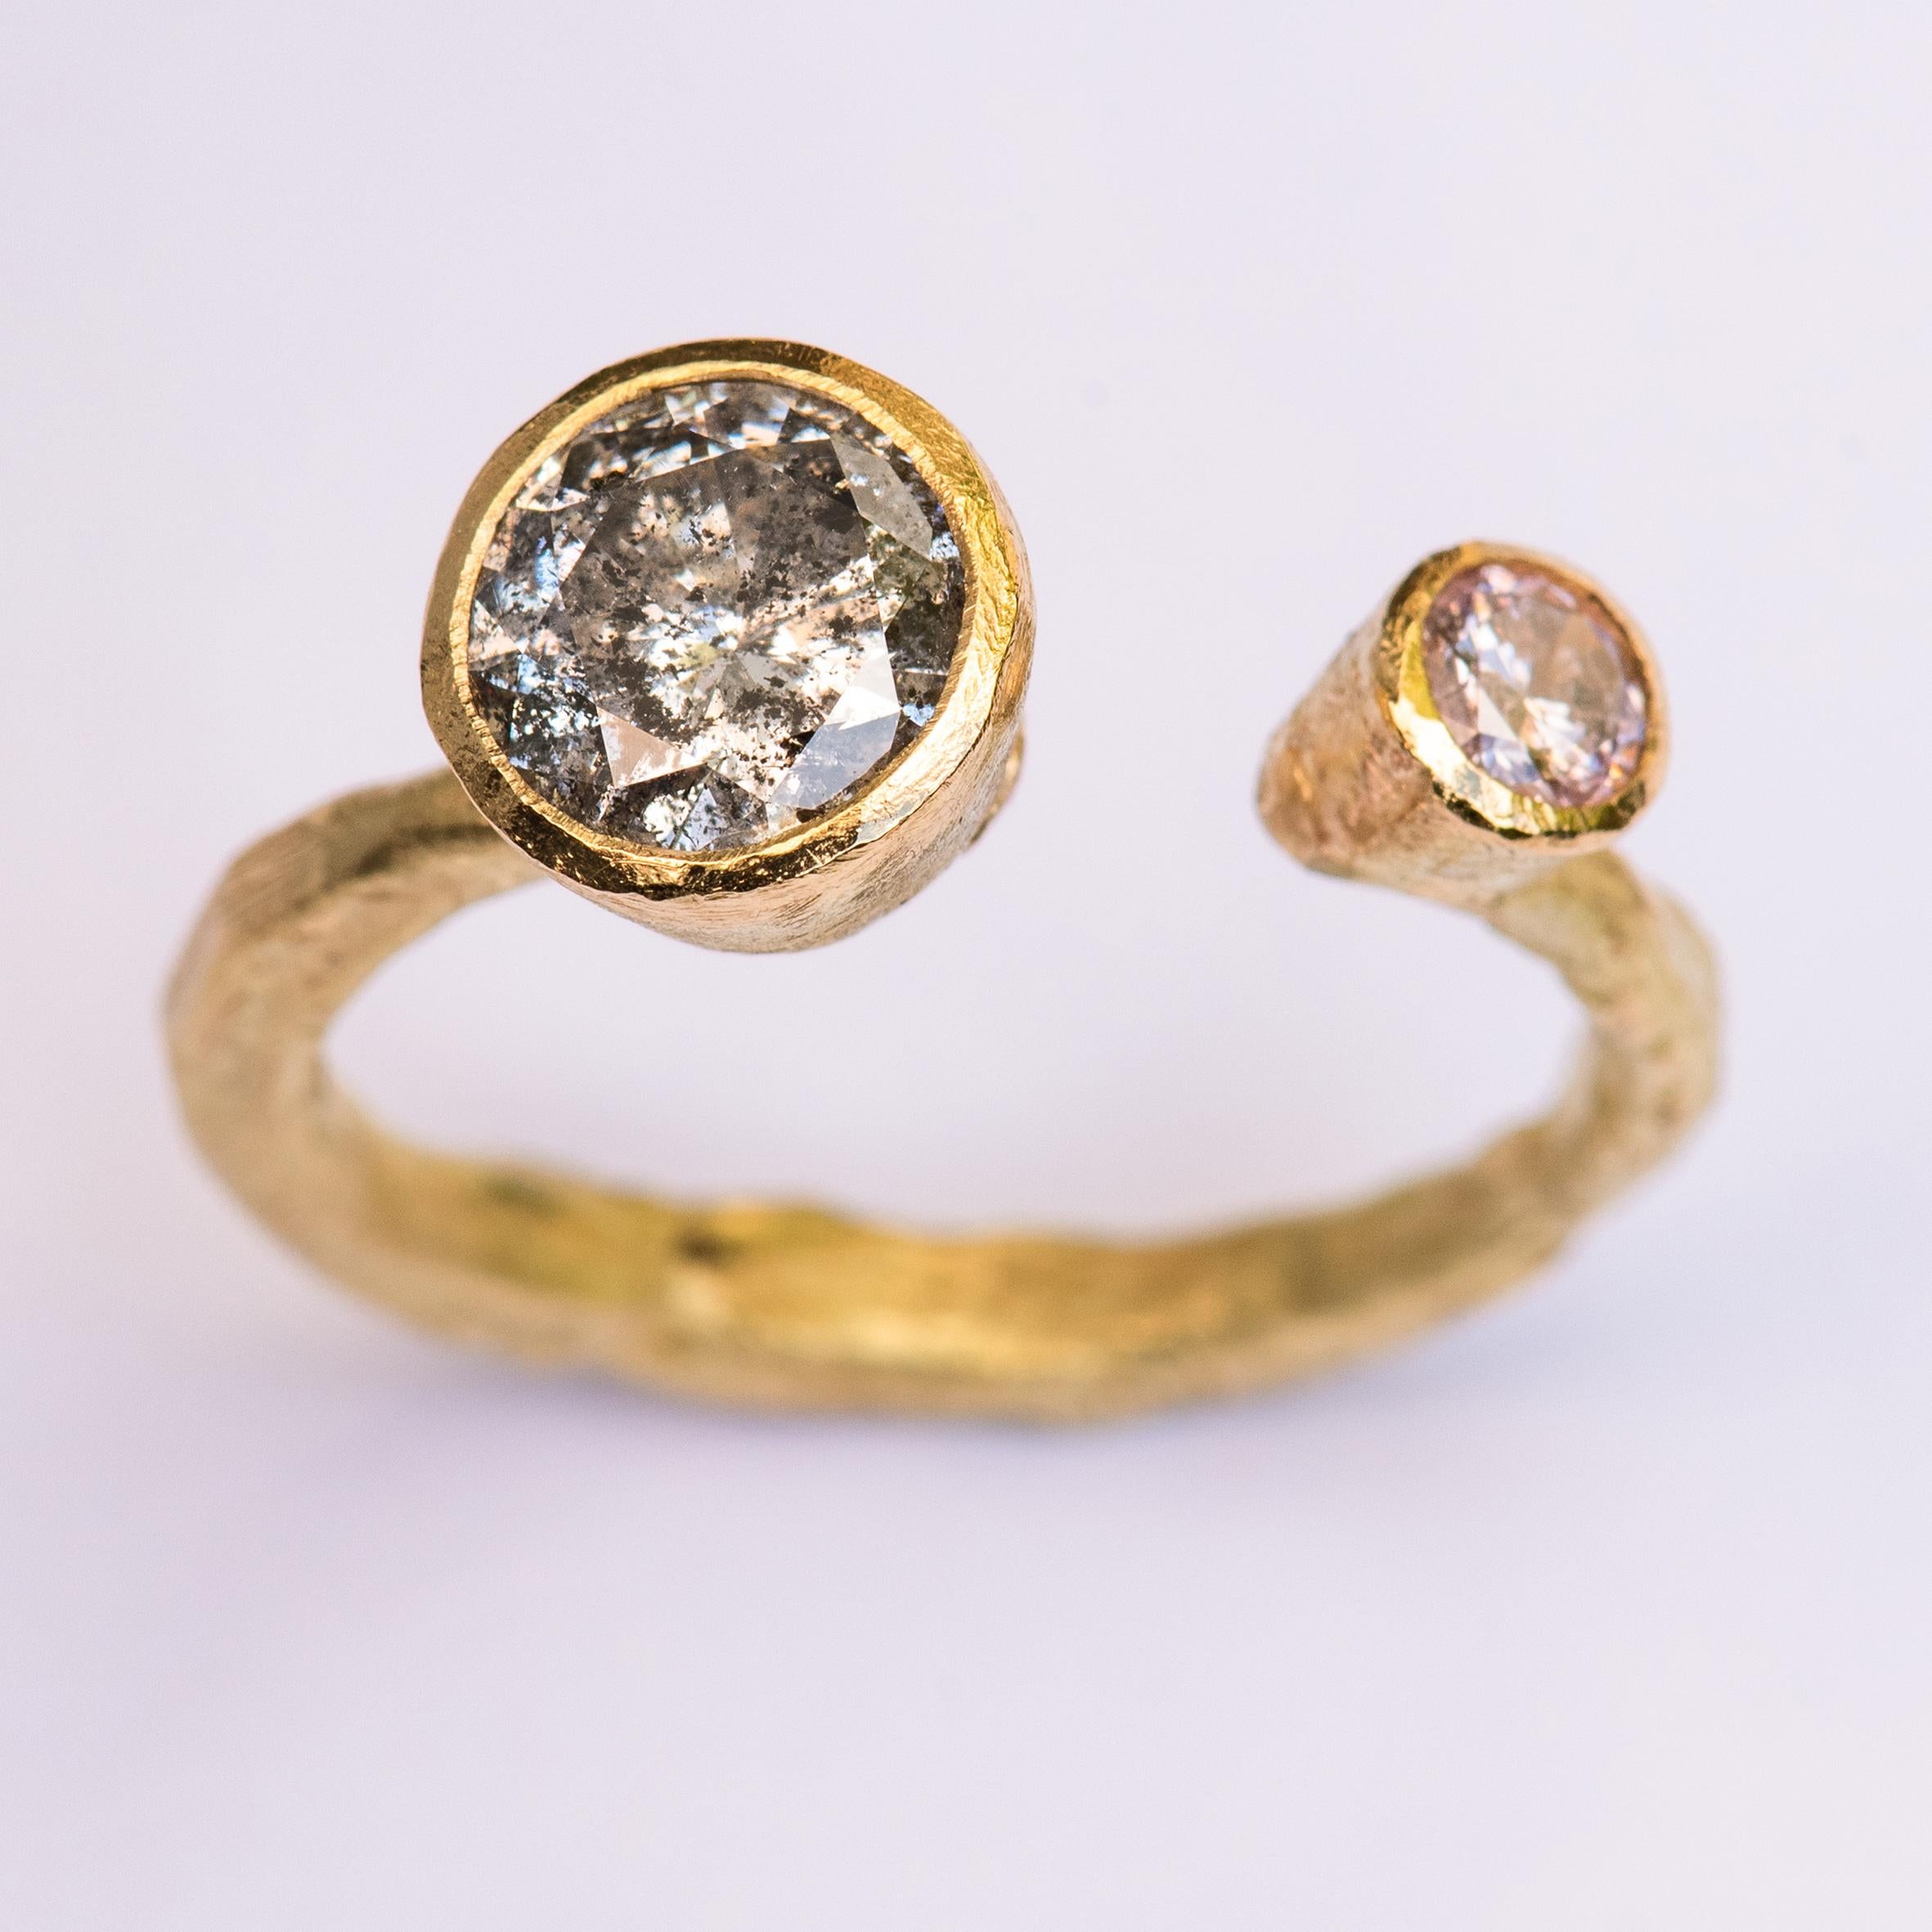 18k yellow gold organic textured open ring with large round 1.57ct salt and pepper grey diamond and 0.20ct pink diamond.
This open ring has been handmade by internationally renowned goldsmith Disa Allsopp. Disa is known for her textured metals and